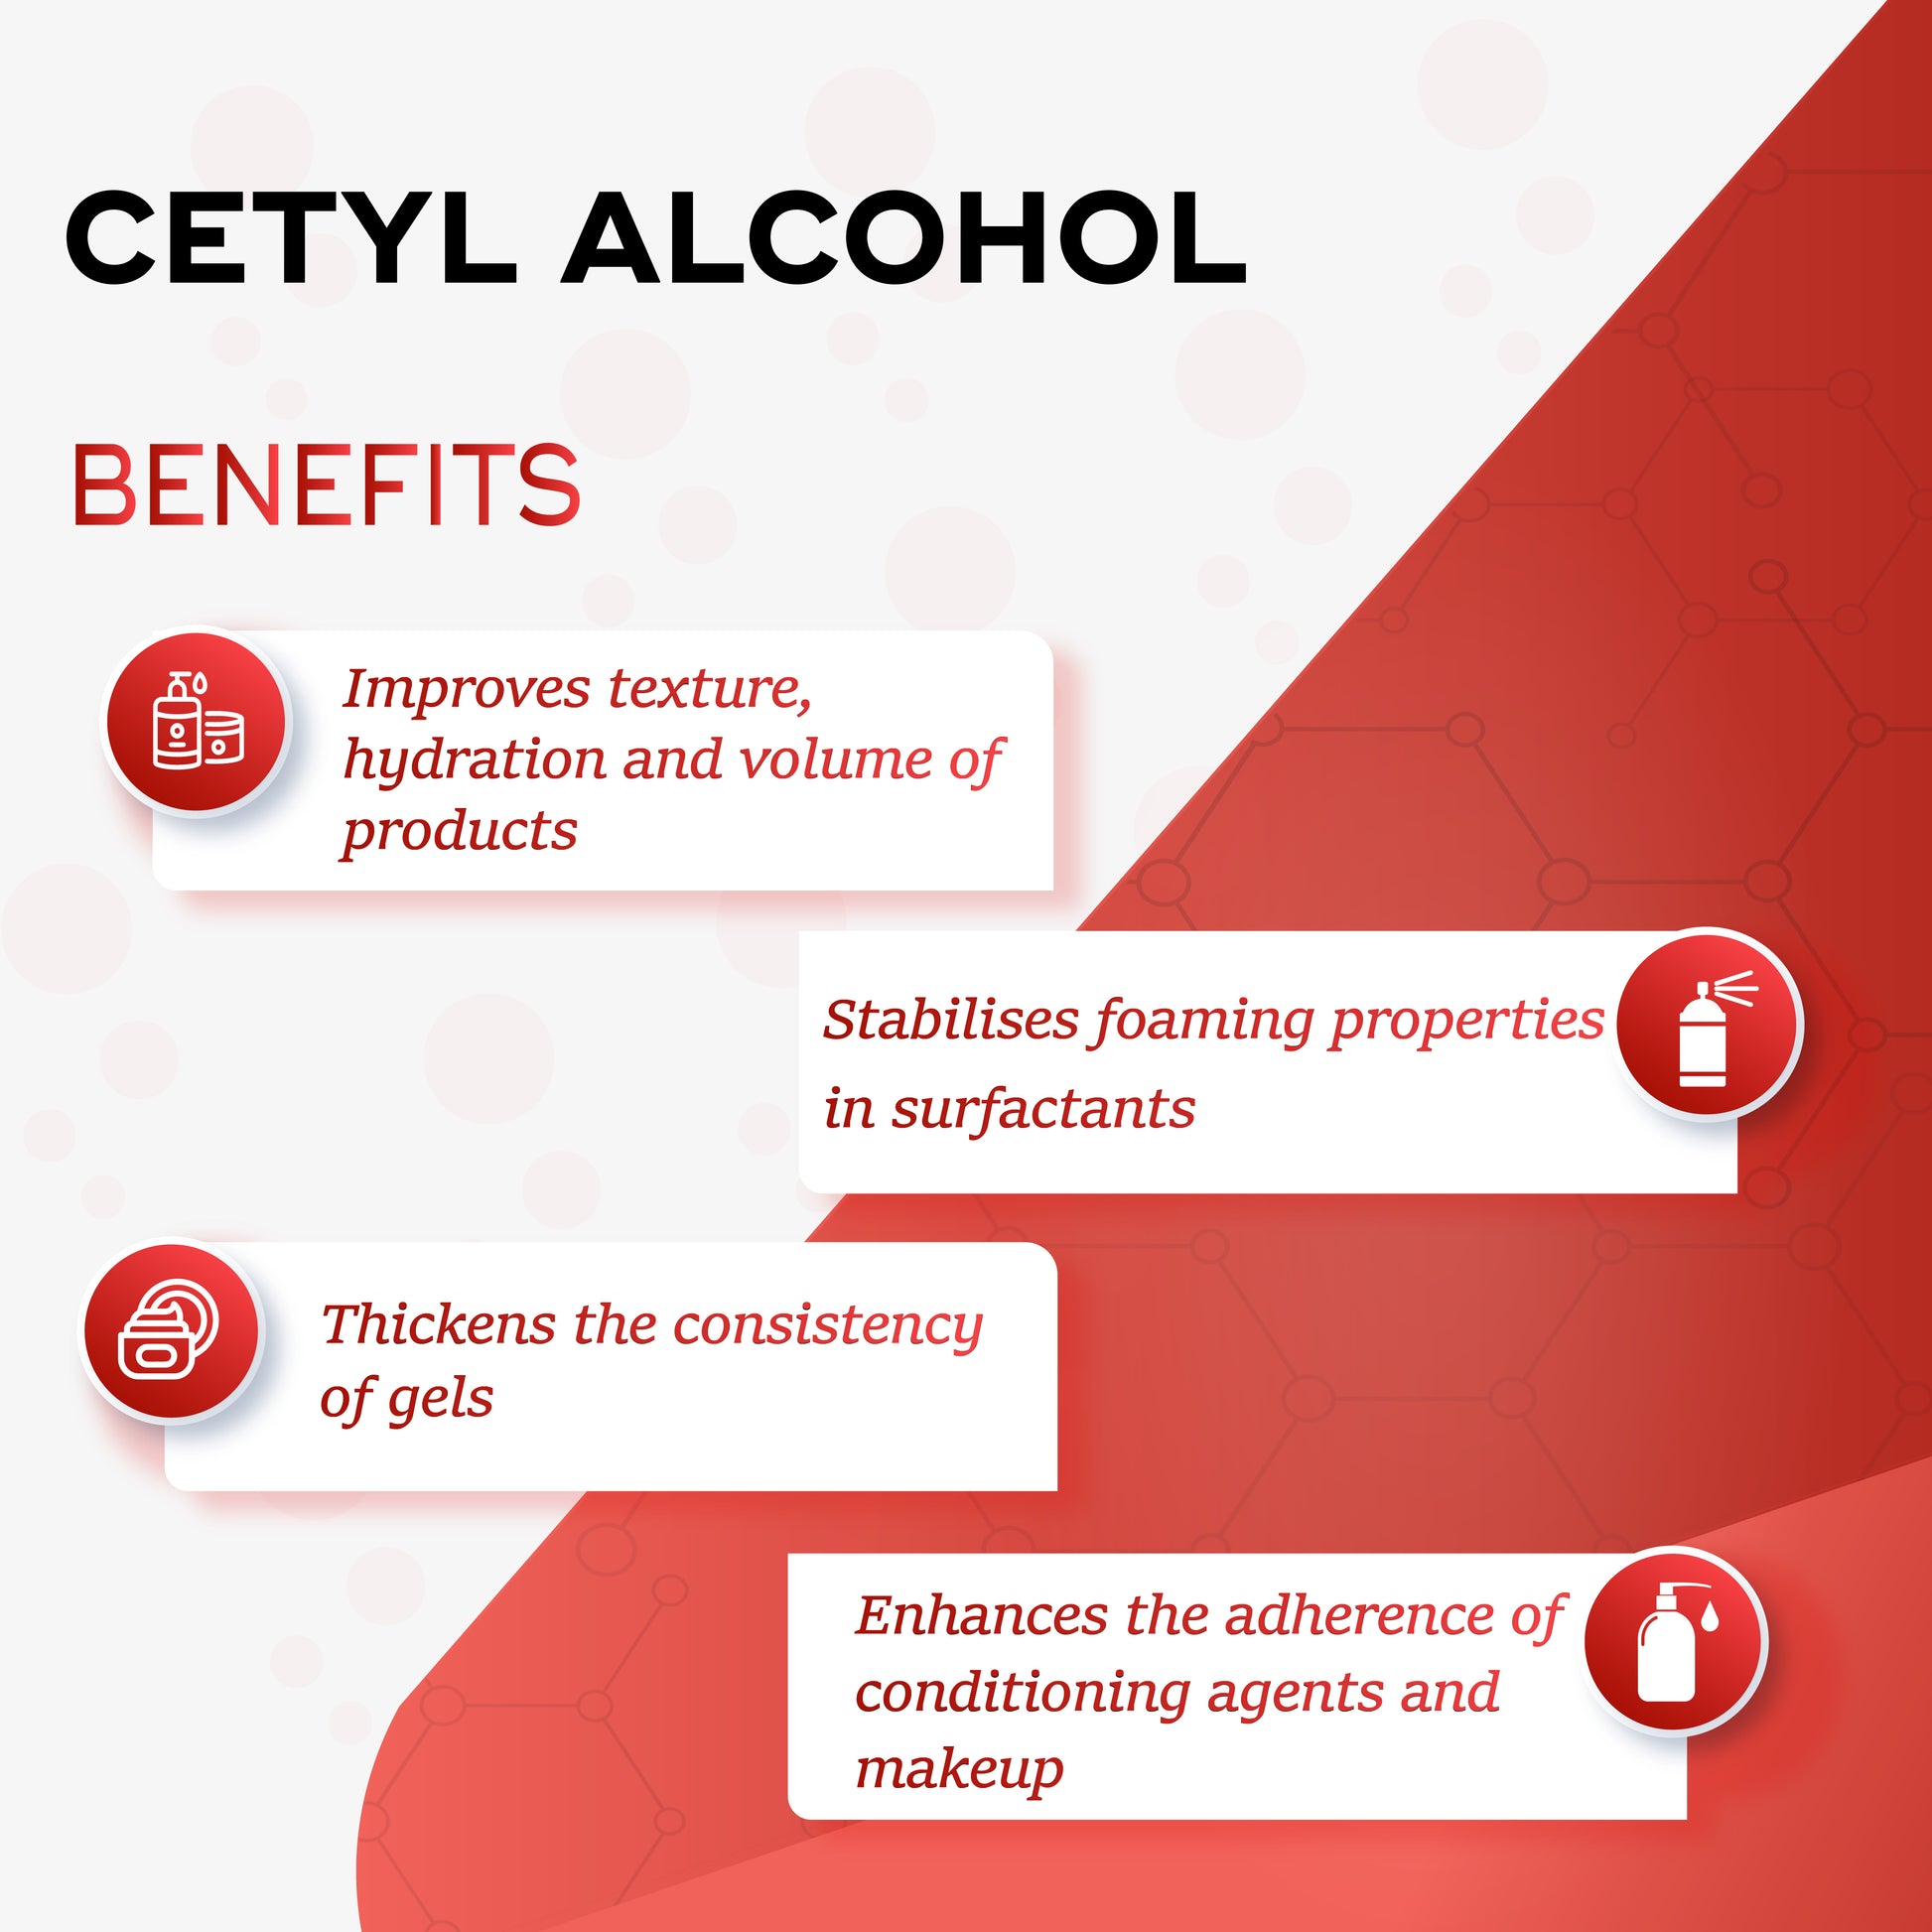 How to Use Cetyl Alcohol for Skincare: 13 Steps - wikiHow